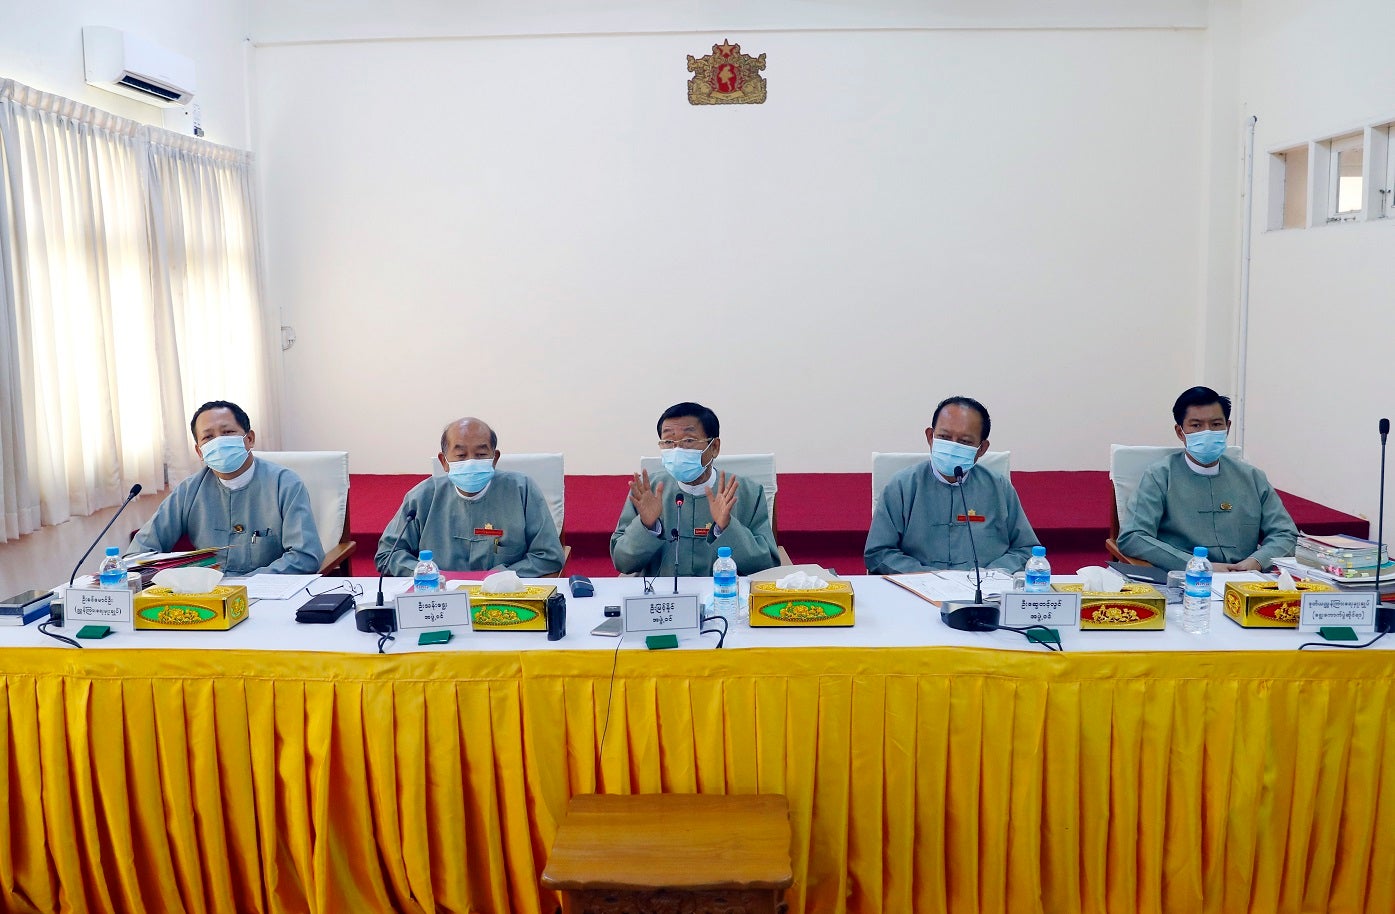 Members of the Union Election Commission  during a press conference in Naypyitaw, Myanmar on Thursday, June 4, 2020. 